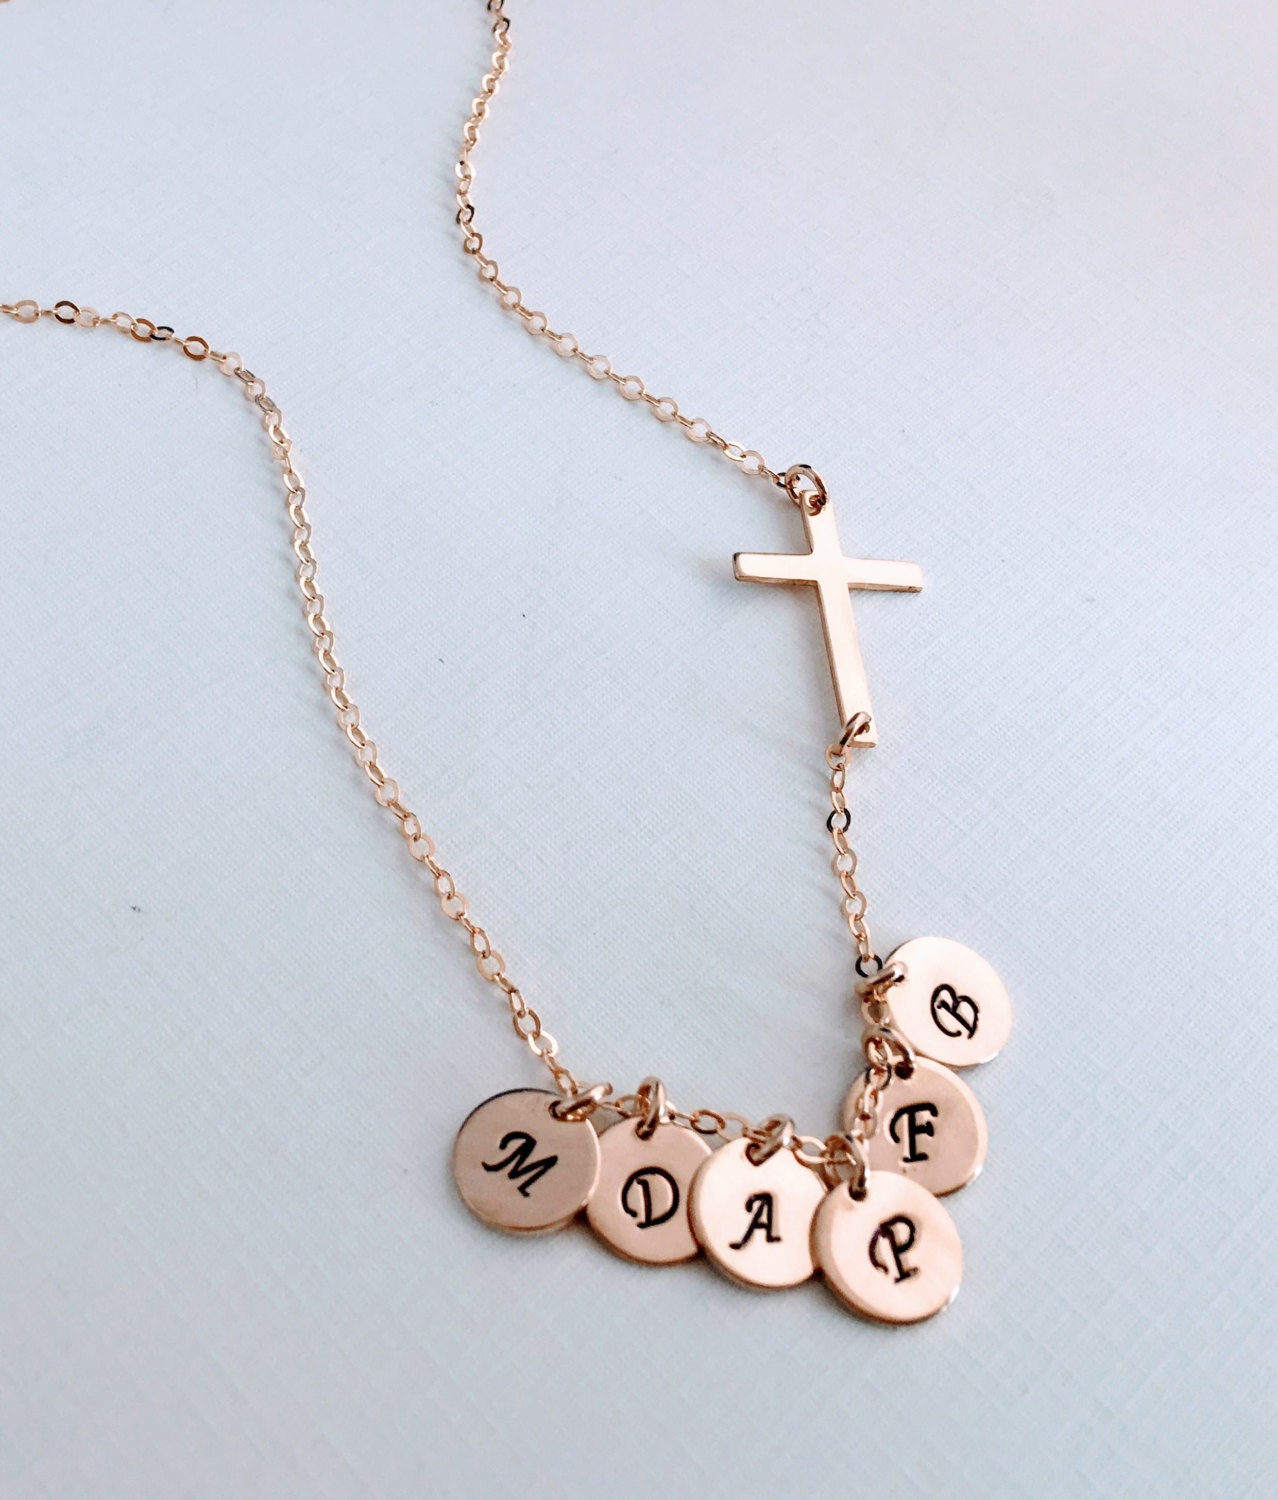 Personalized Sideways cross necklace, initial necklace, monogram necklace, hand stamped Initial, catholic blessed necklace, horizontal cross